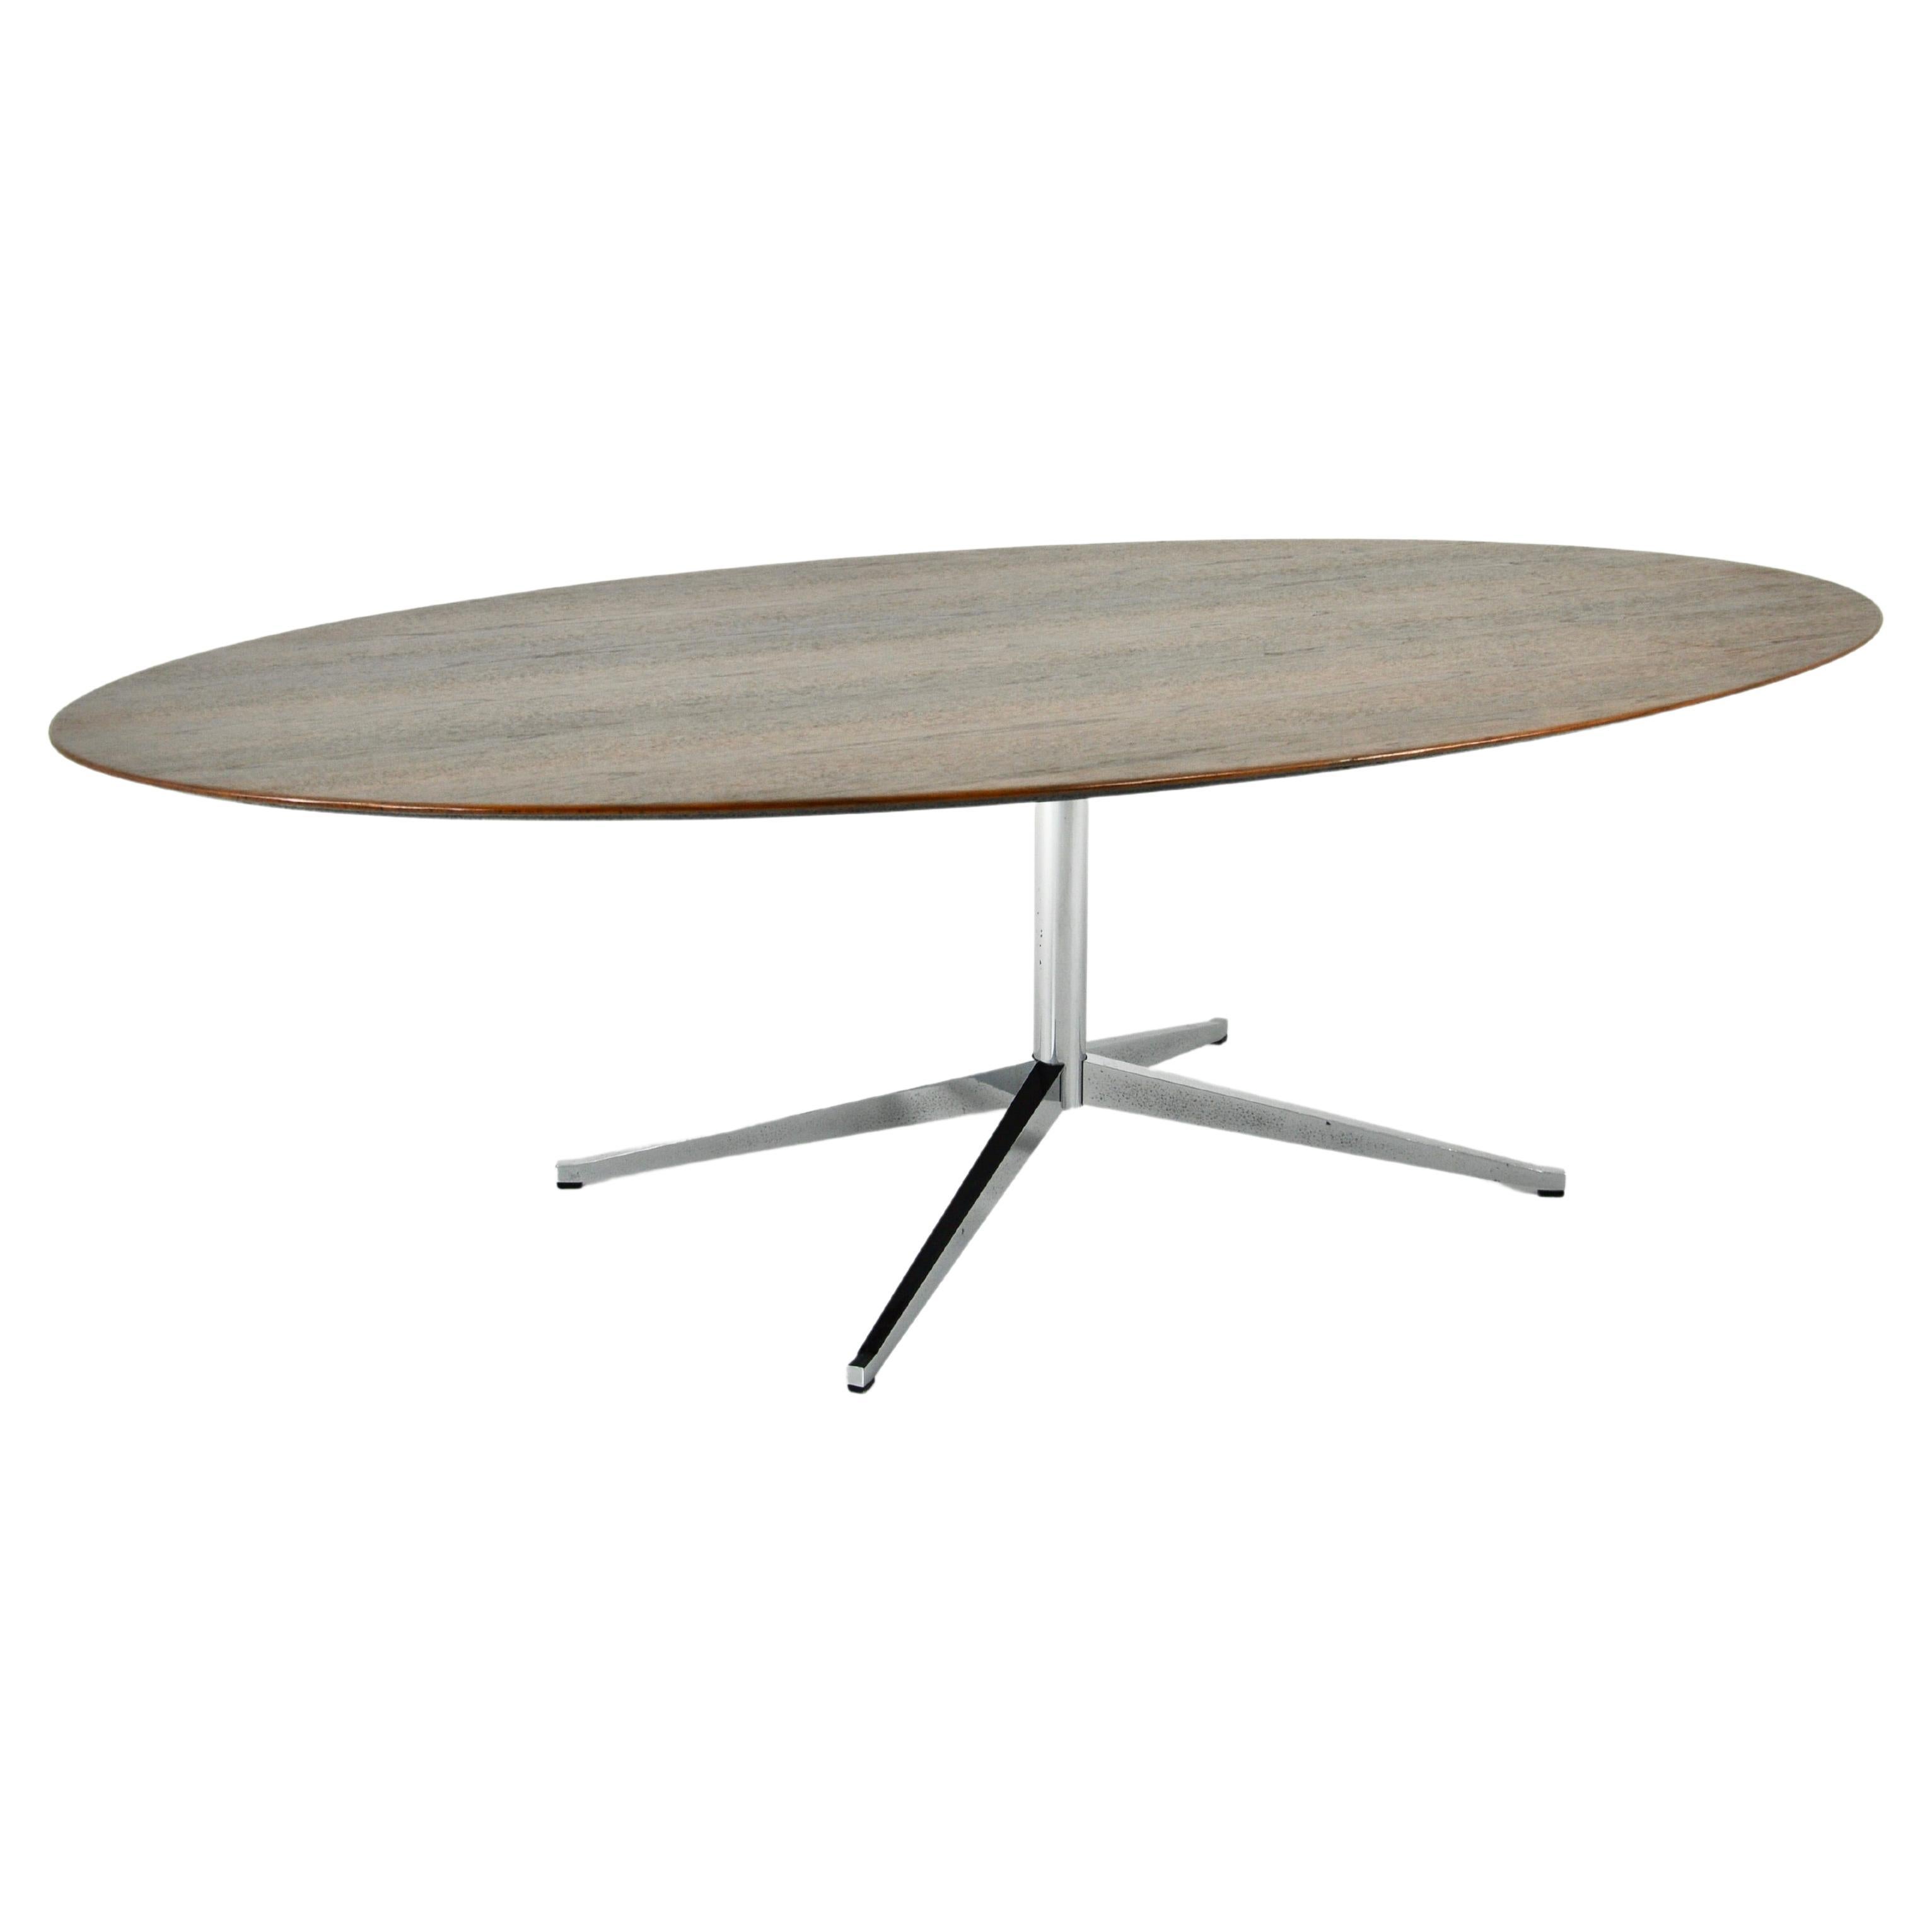 Table with wooden top and metal base by Florence Knoll. Large model. Wear due to time and age of the table.